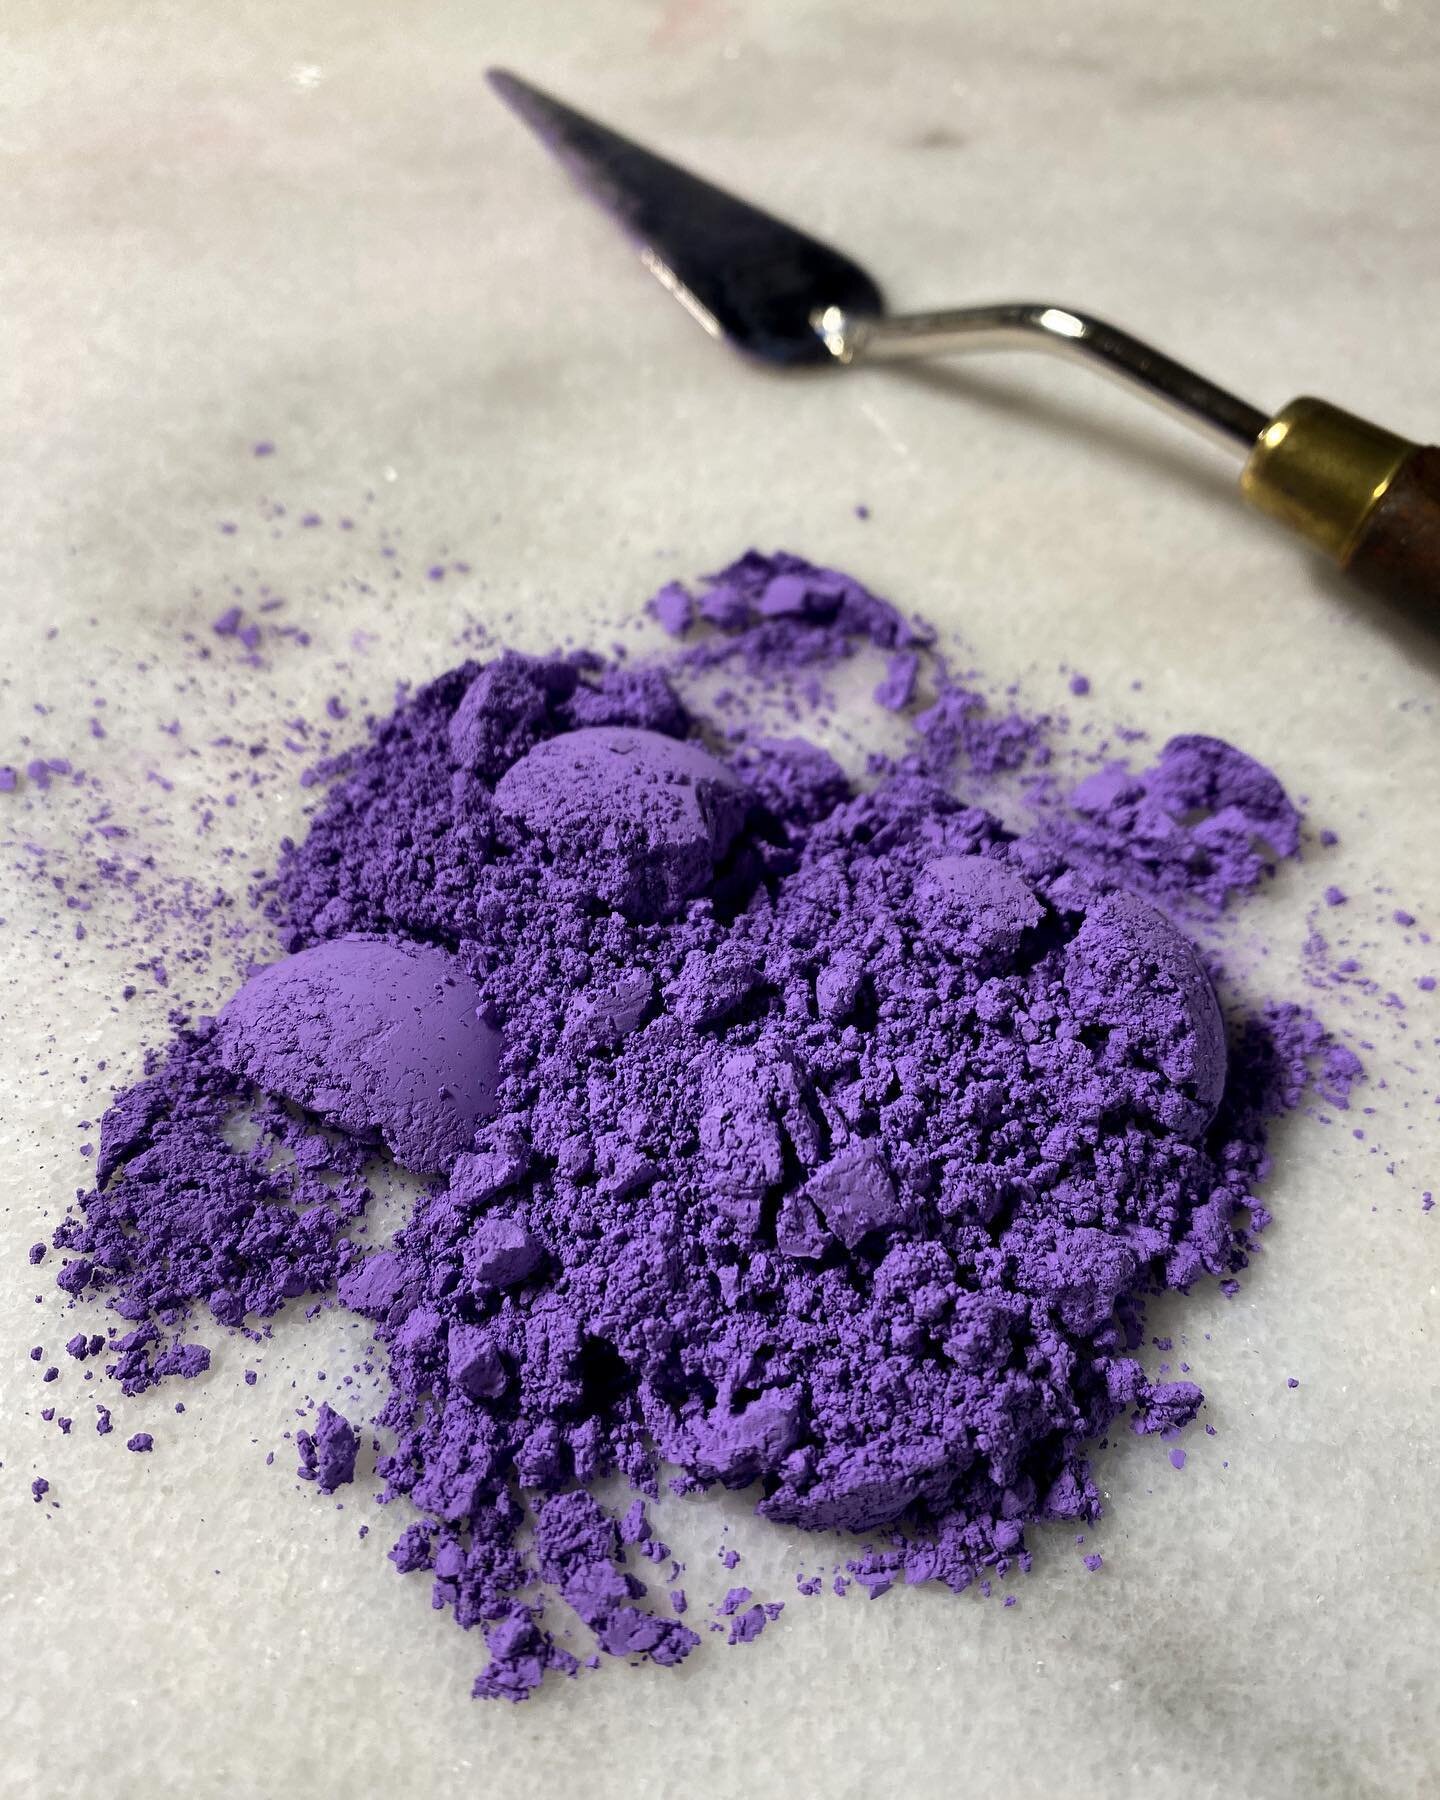 Ultramarine violet on the slab 💜 
It&rsquo;s a week of mulling while the pans await their colour contents!